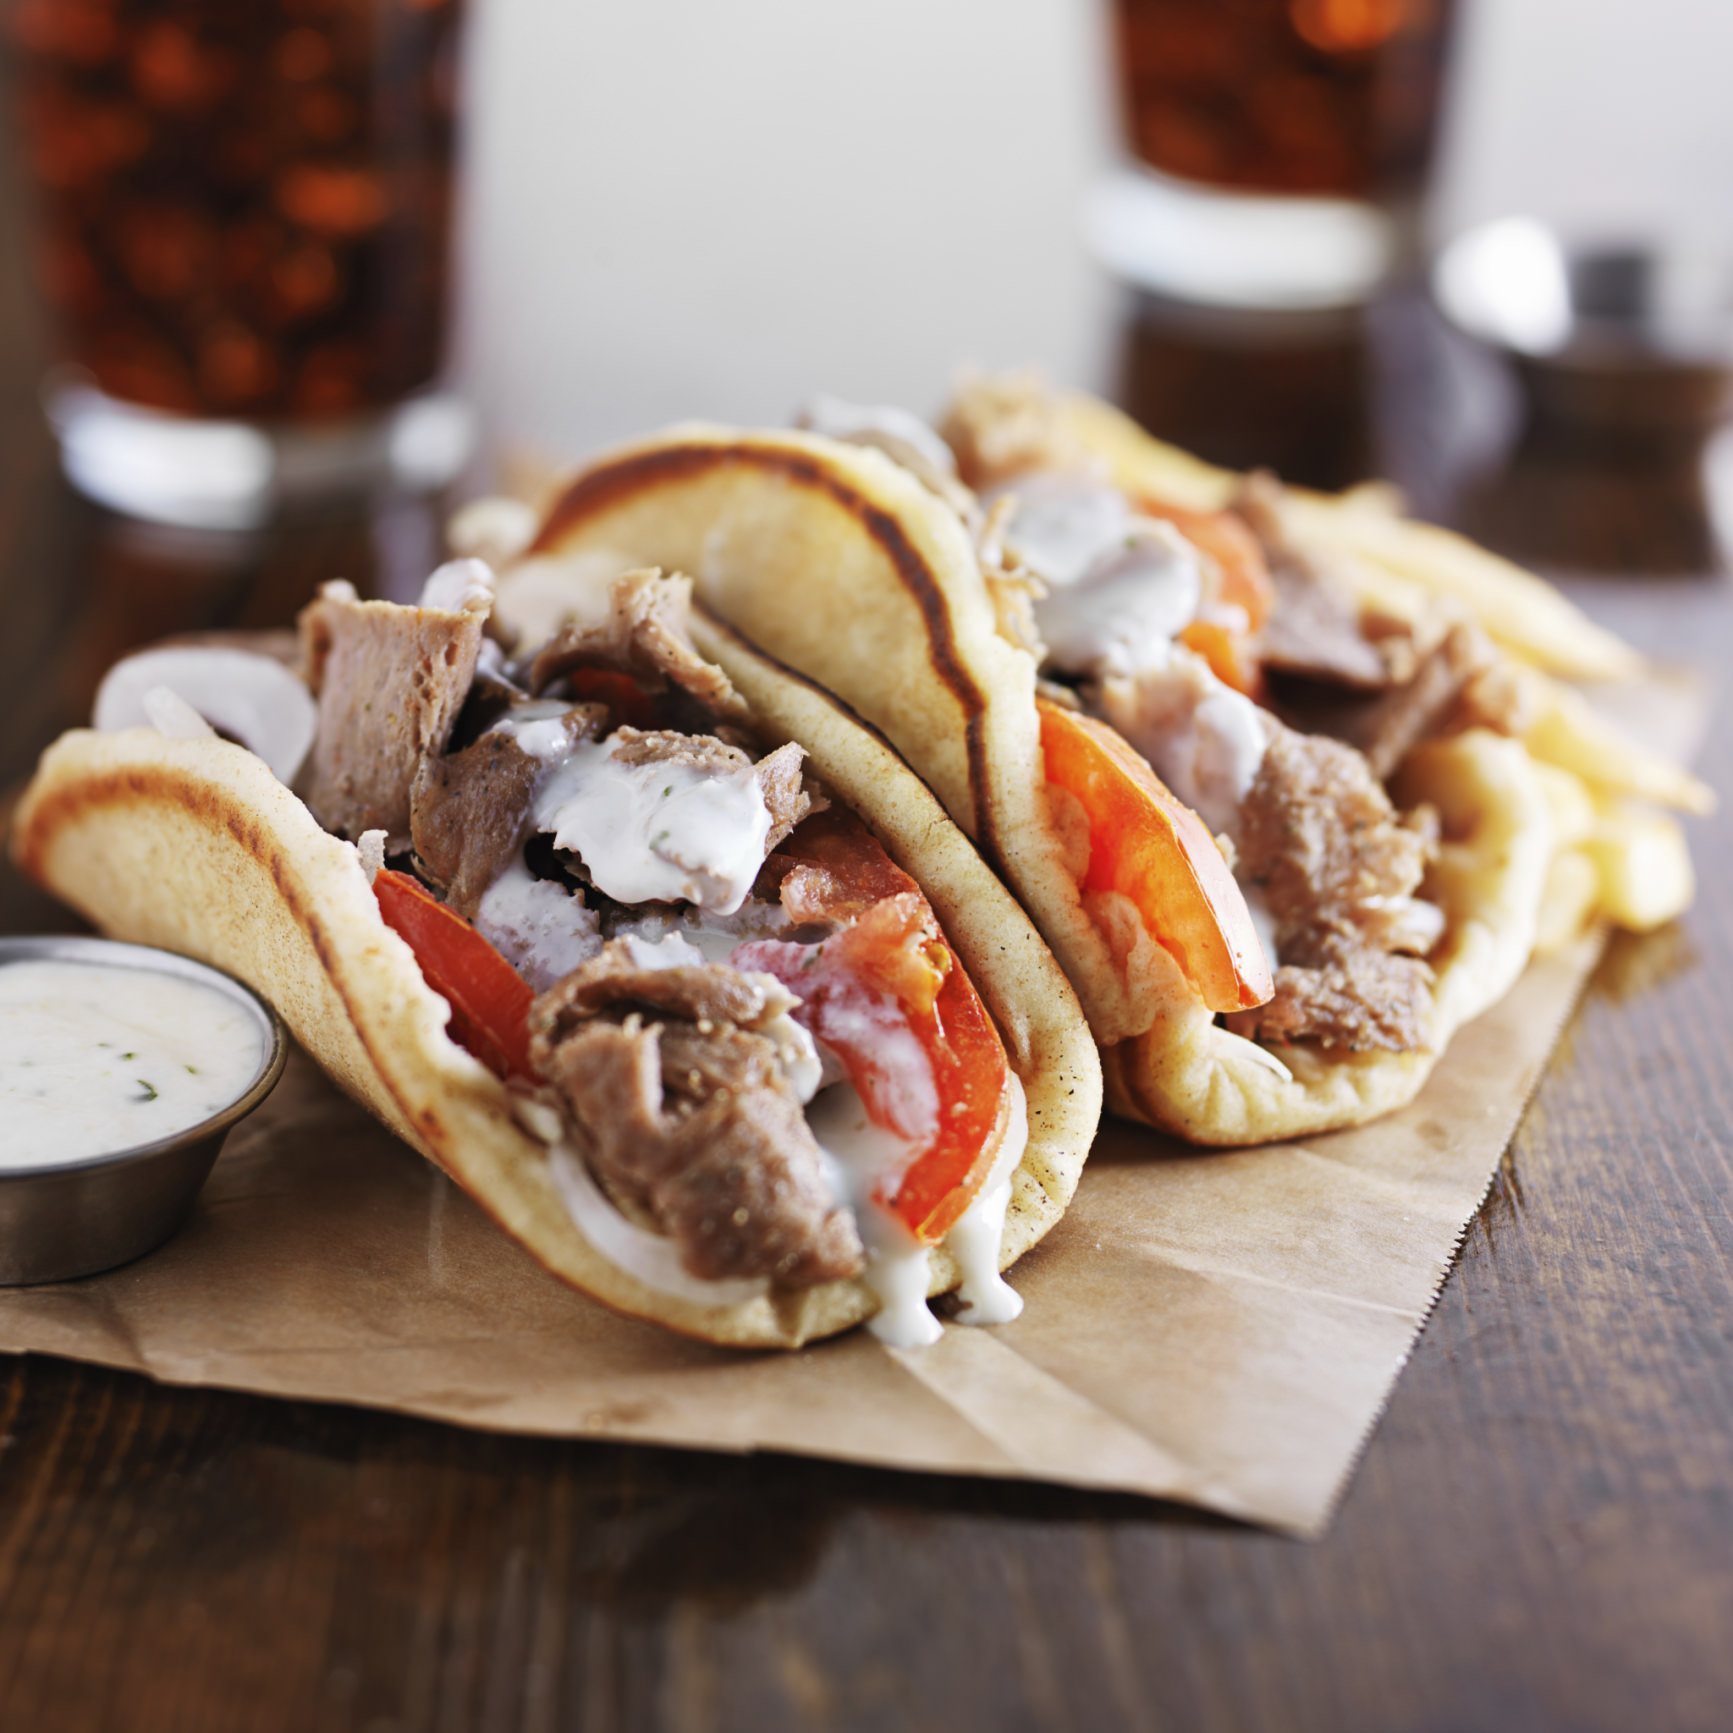 How is Your Gyro Served?